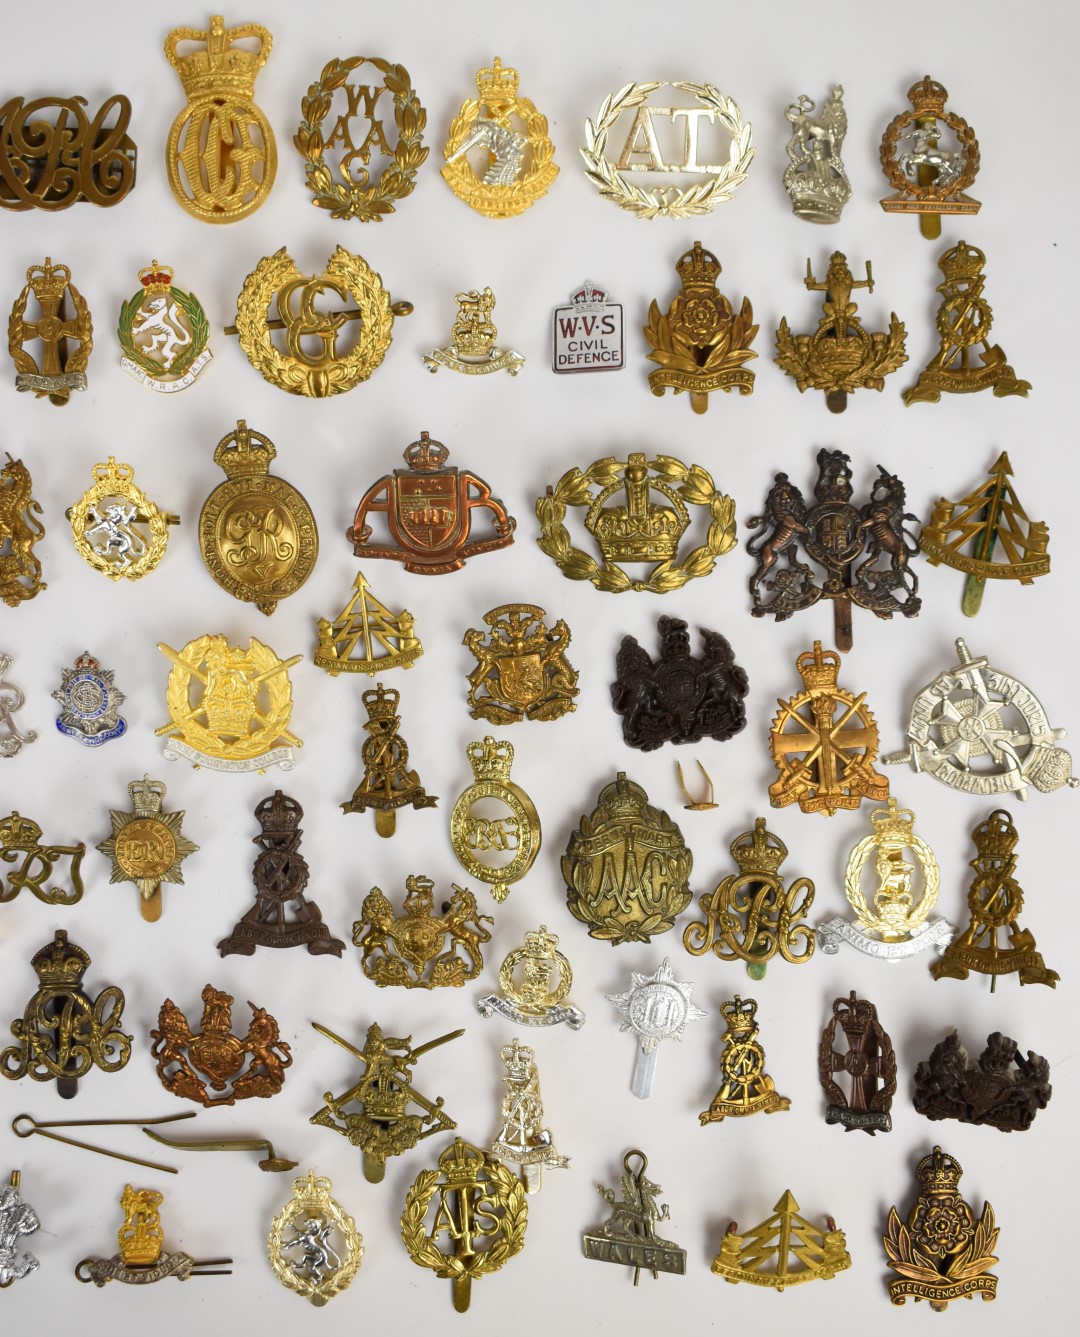 Collection of approximately 80 British Corps and other cap badges including Army Pay Corps, - Image 3 of 3